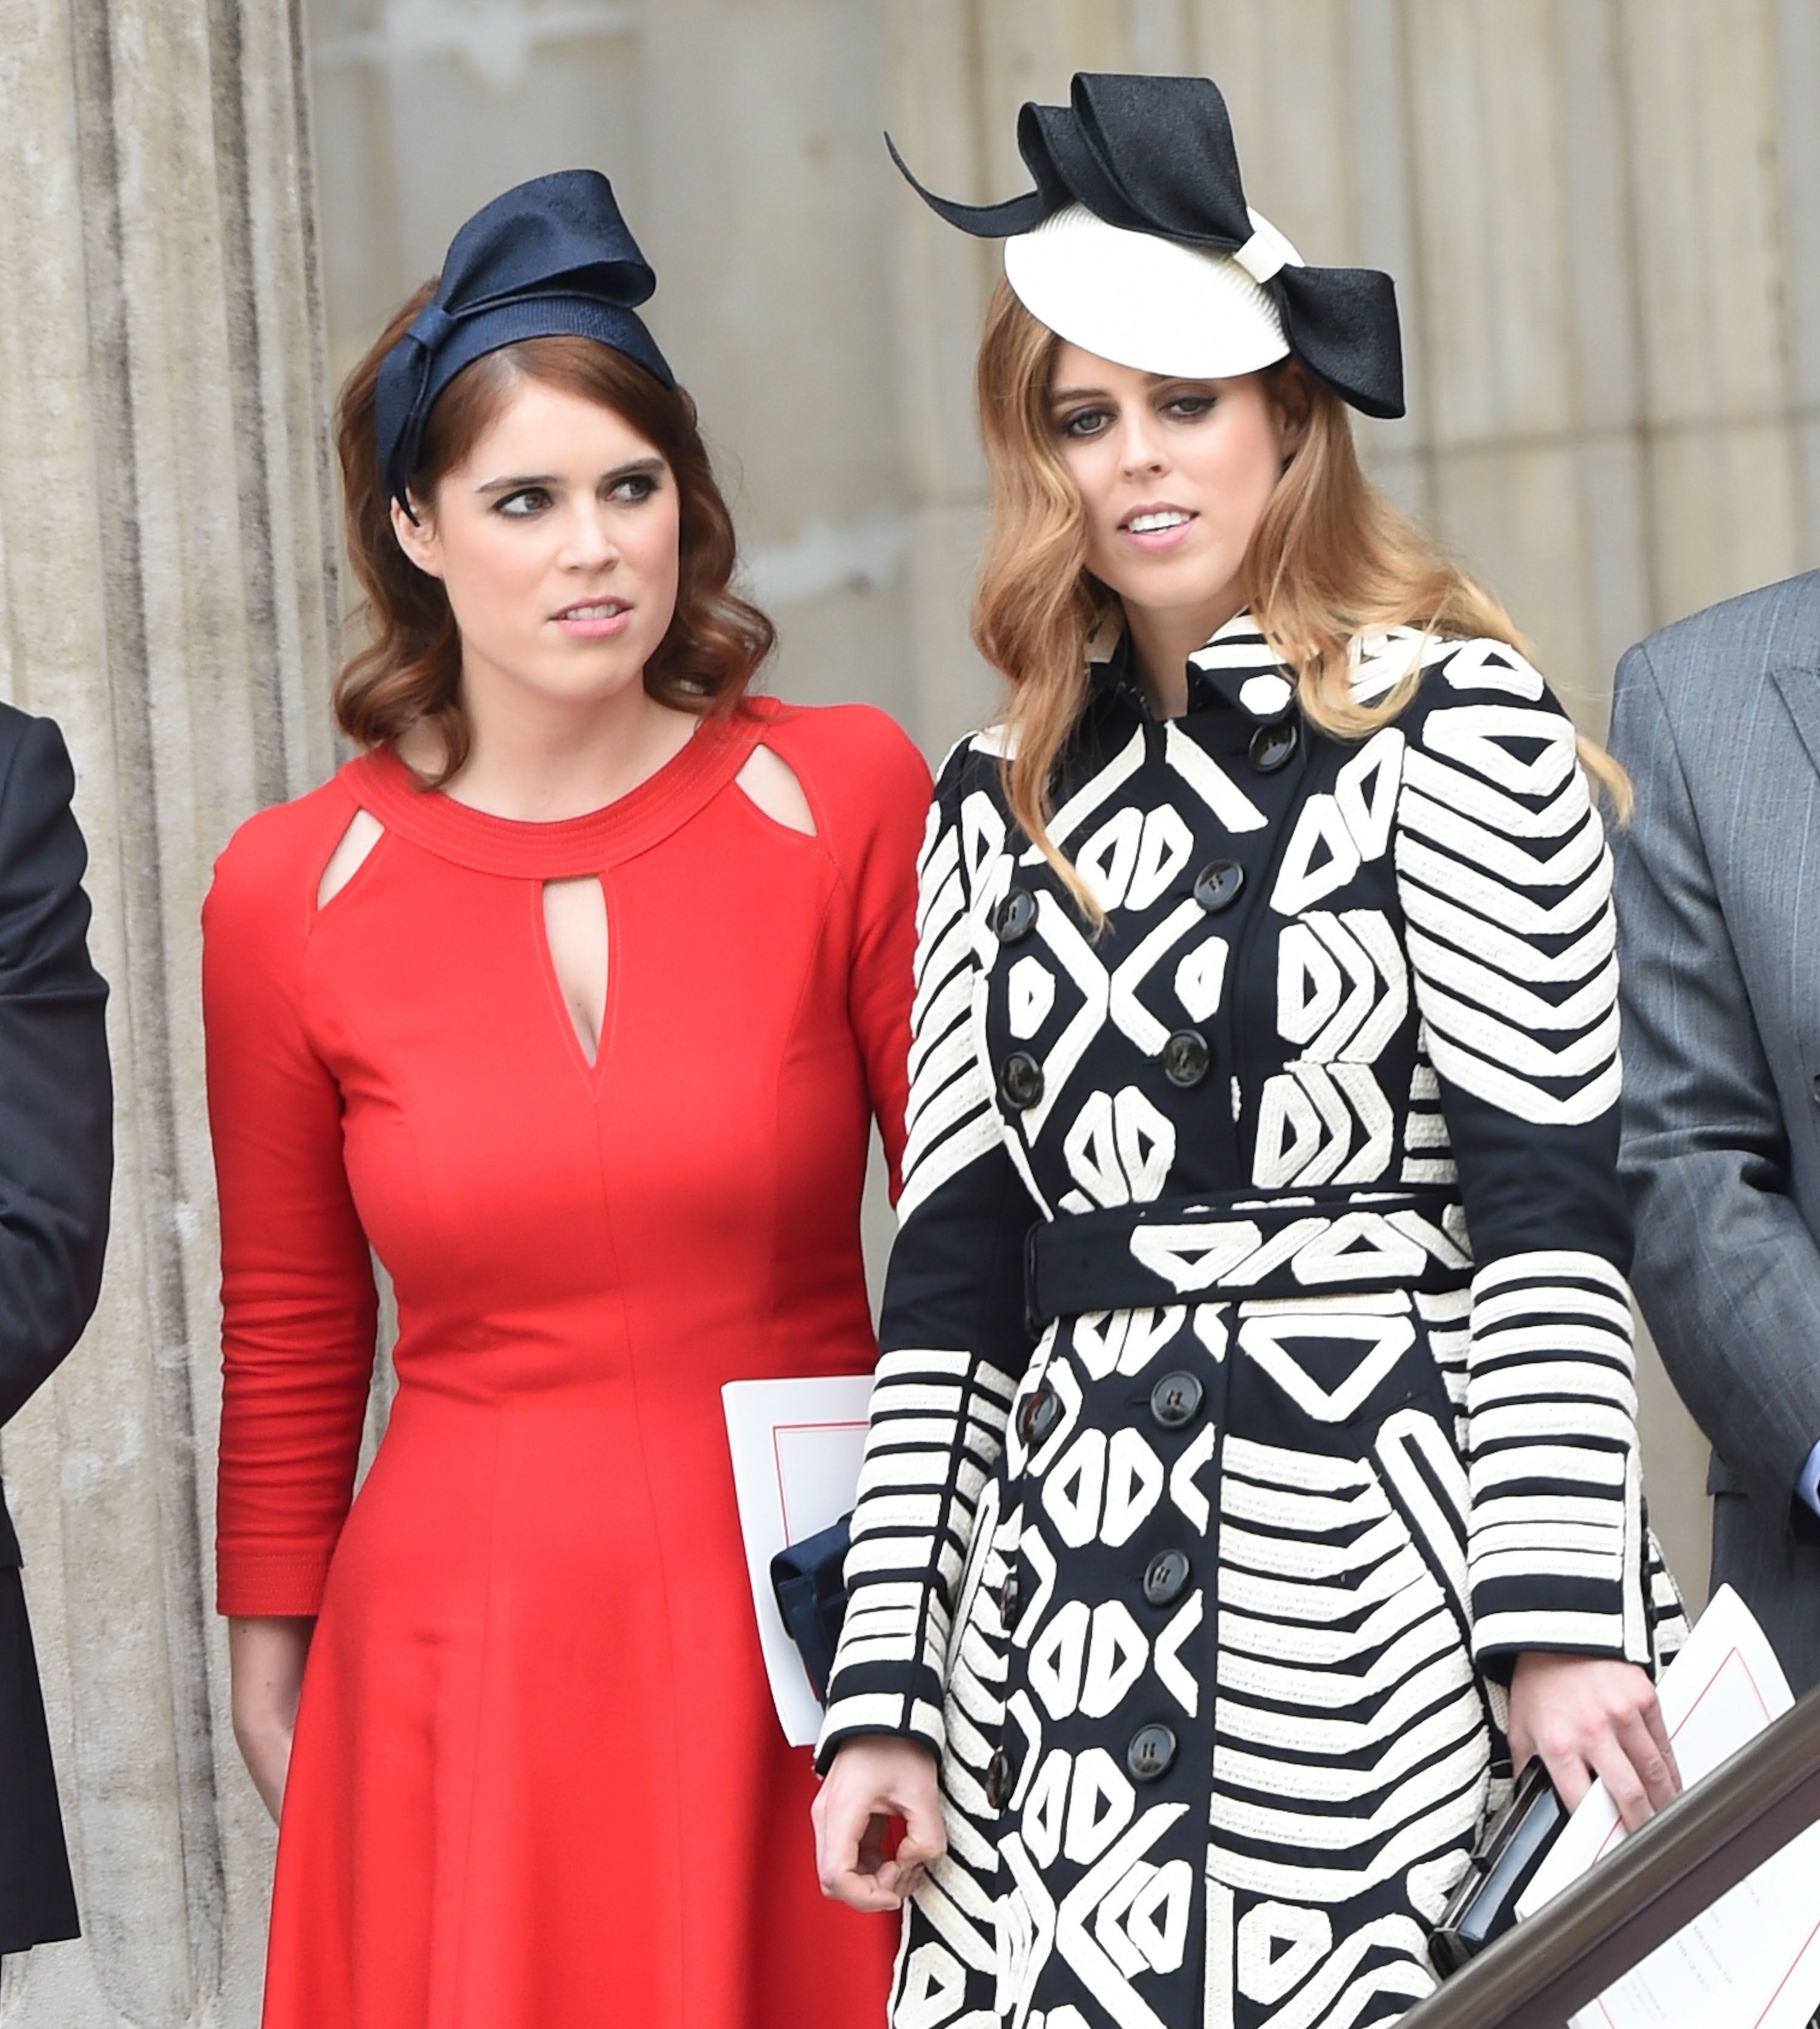 Sarah Ferguson Using Princess Beatrice and Princess Eugenie To Self-Promote: Queen Elizabeth Appalled